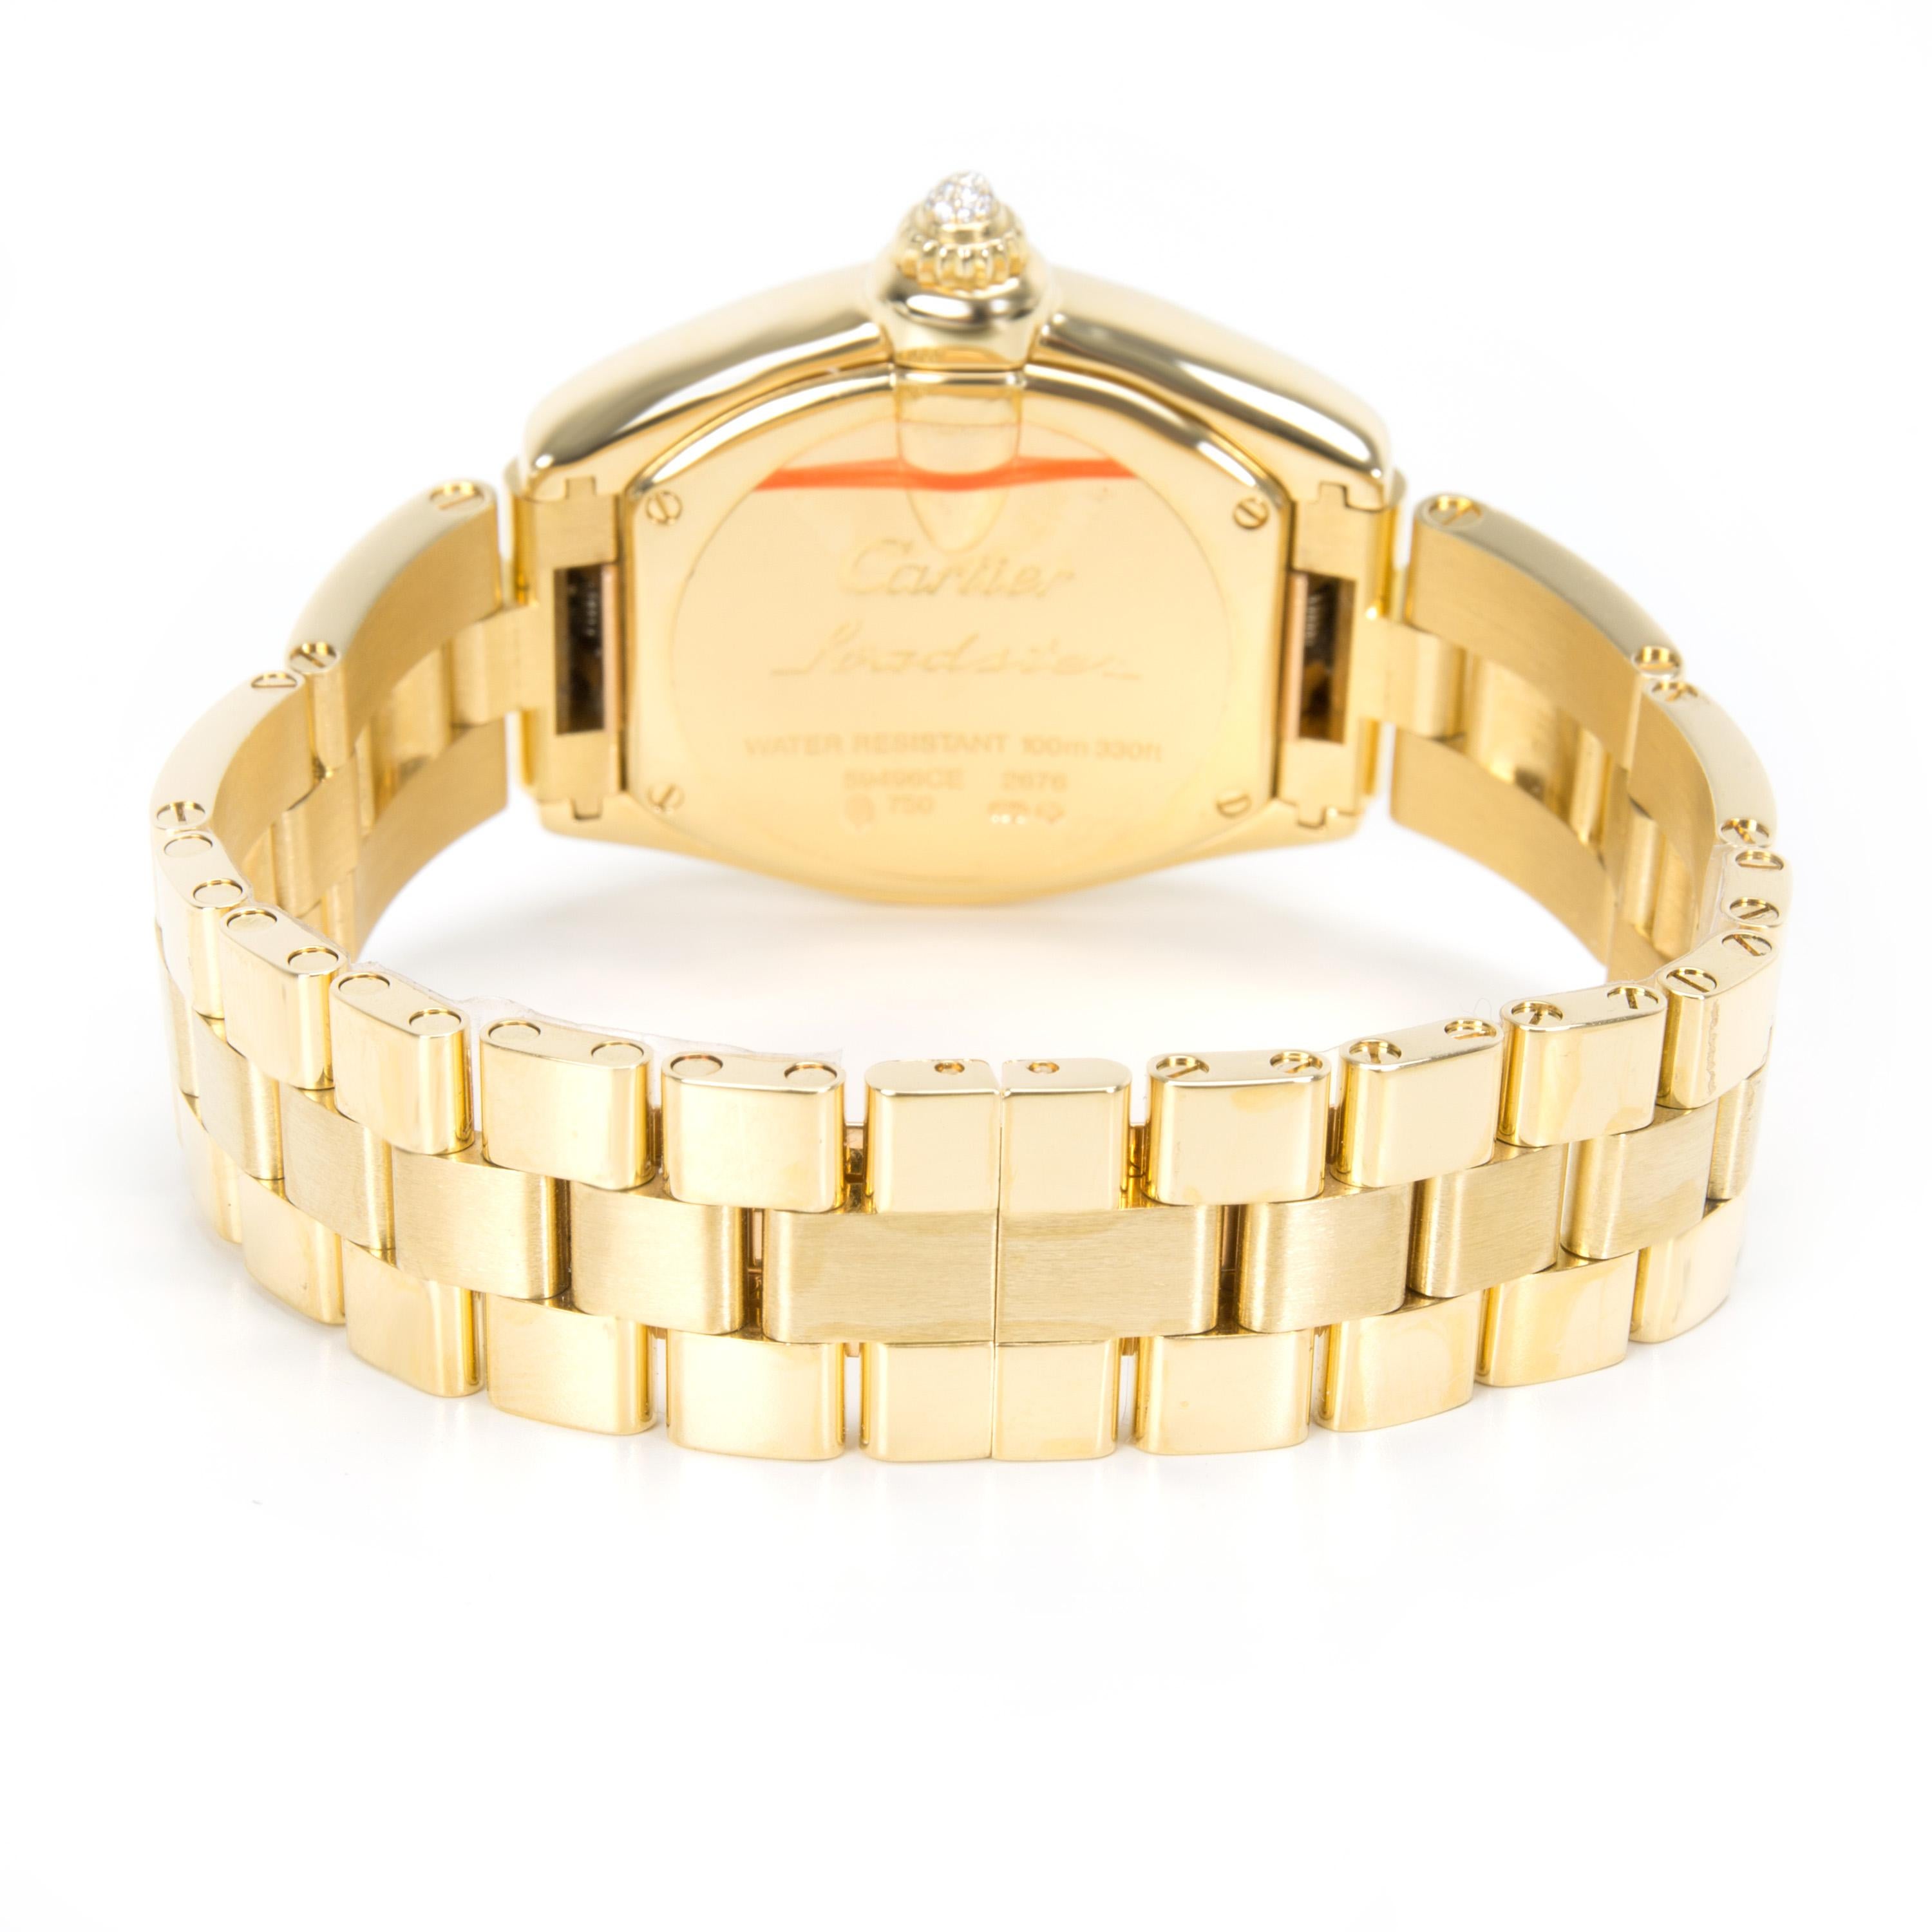 Retail price 30,325 USD. Unworn and in excellent condition. Photos of actual watch. Comes with an extra strap and deployment buckle. Comes with the original box, papers, and instructions.

Cartier Roadster WE5001X1 Women's Watch in 18kt Yellow